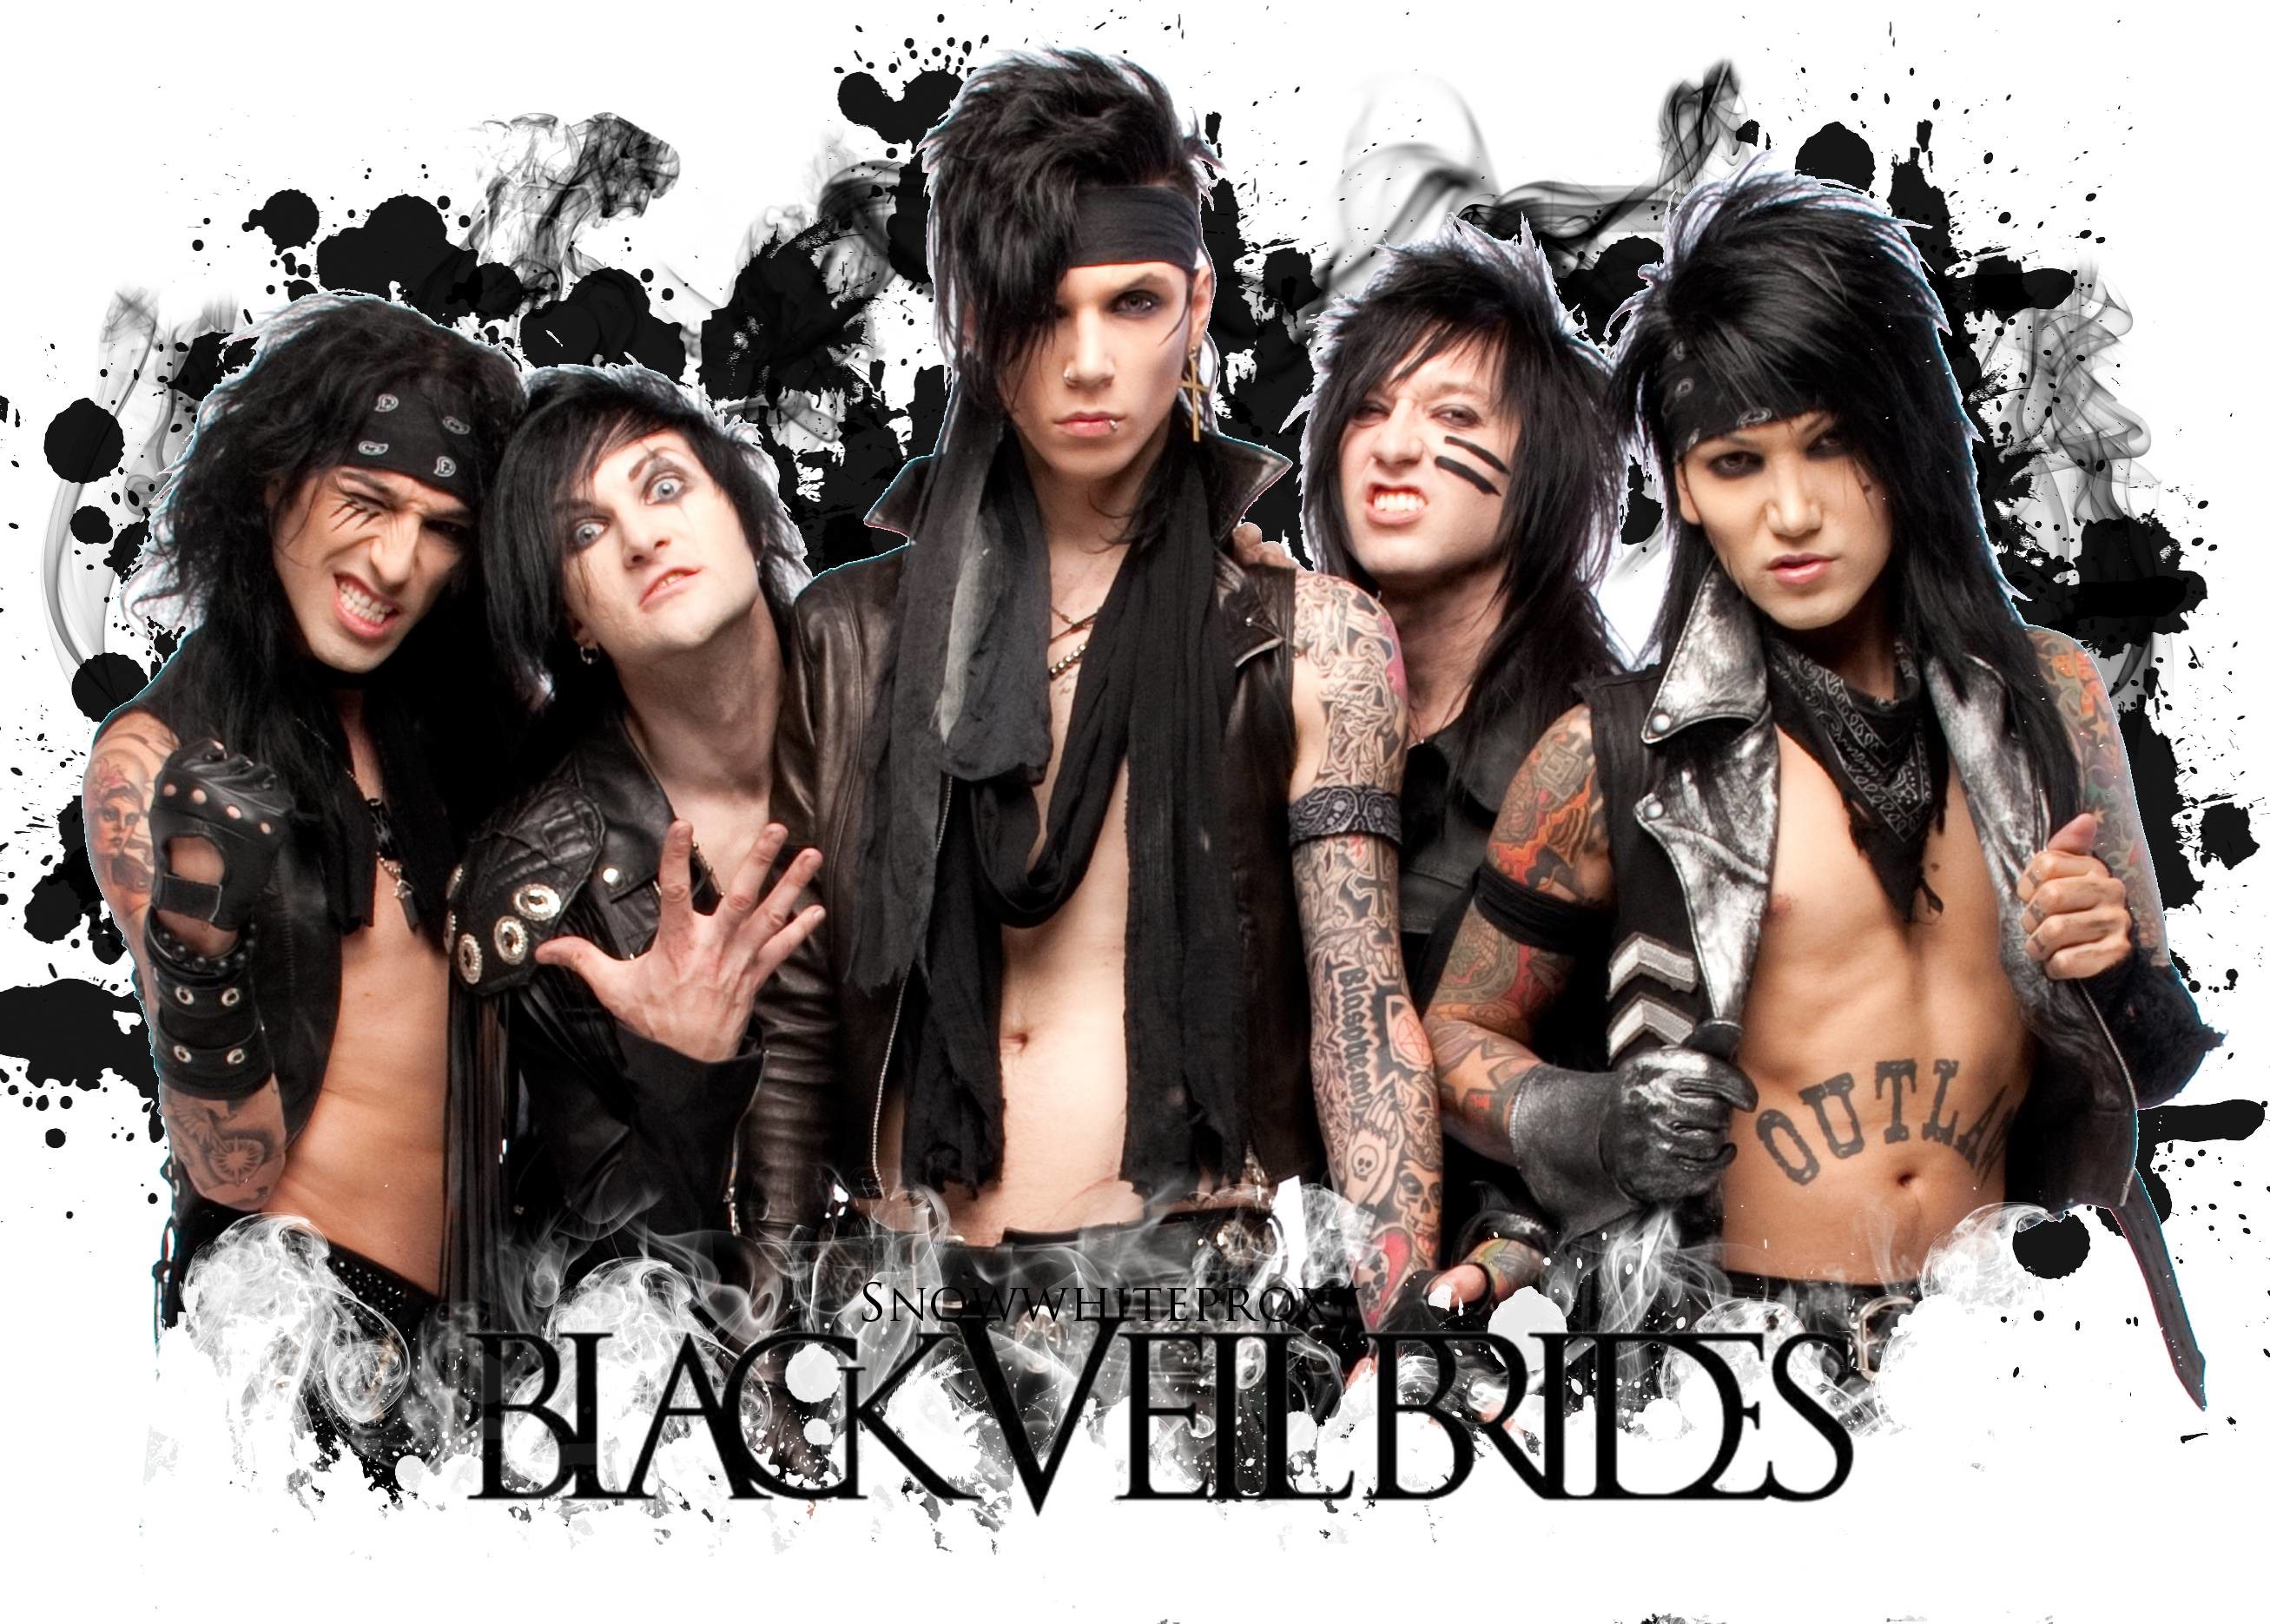 2614x1870 ... 26 Black Veil Brides HD Wallpapers | Backgrounds - Wallpaper Abyss